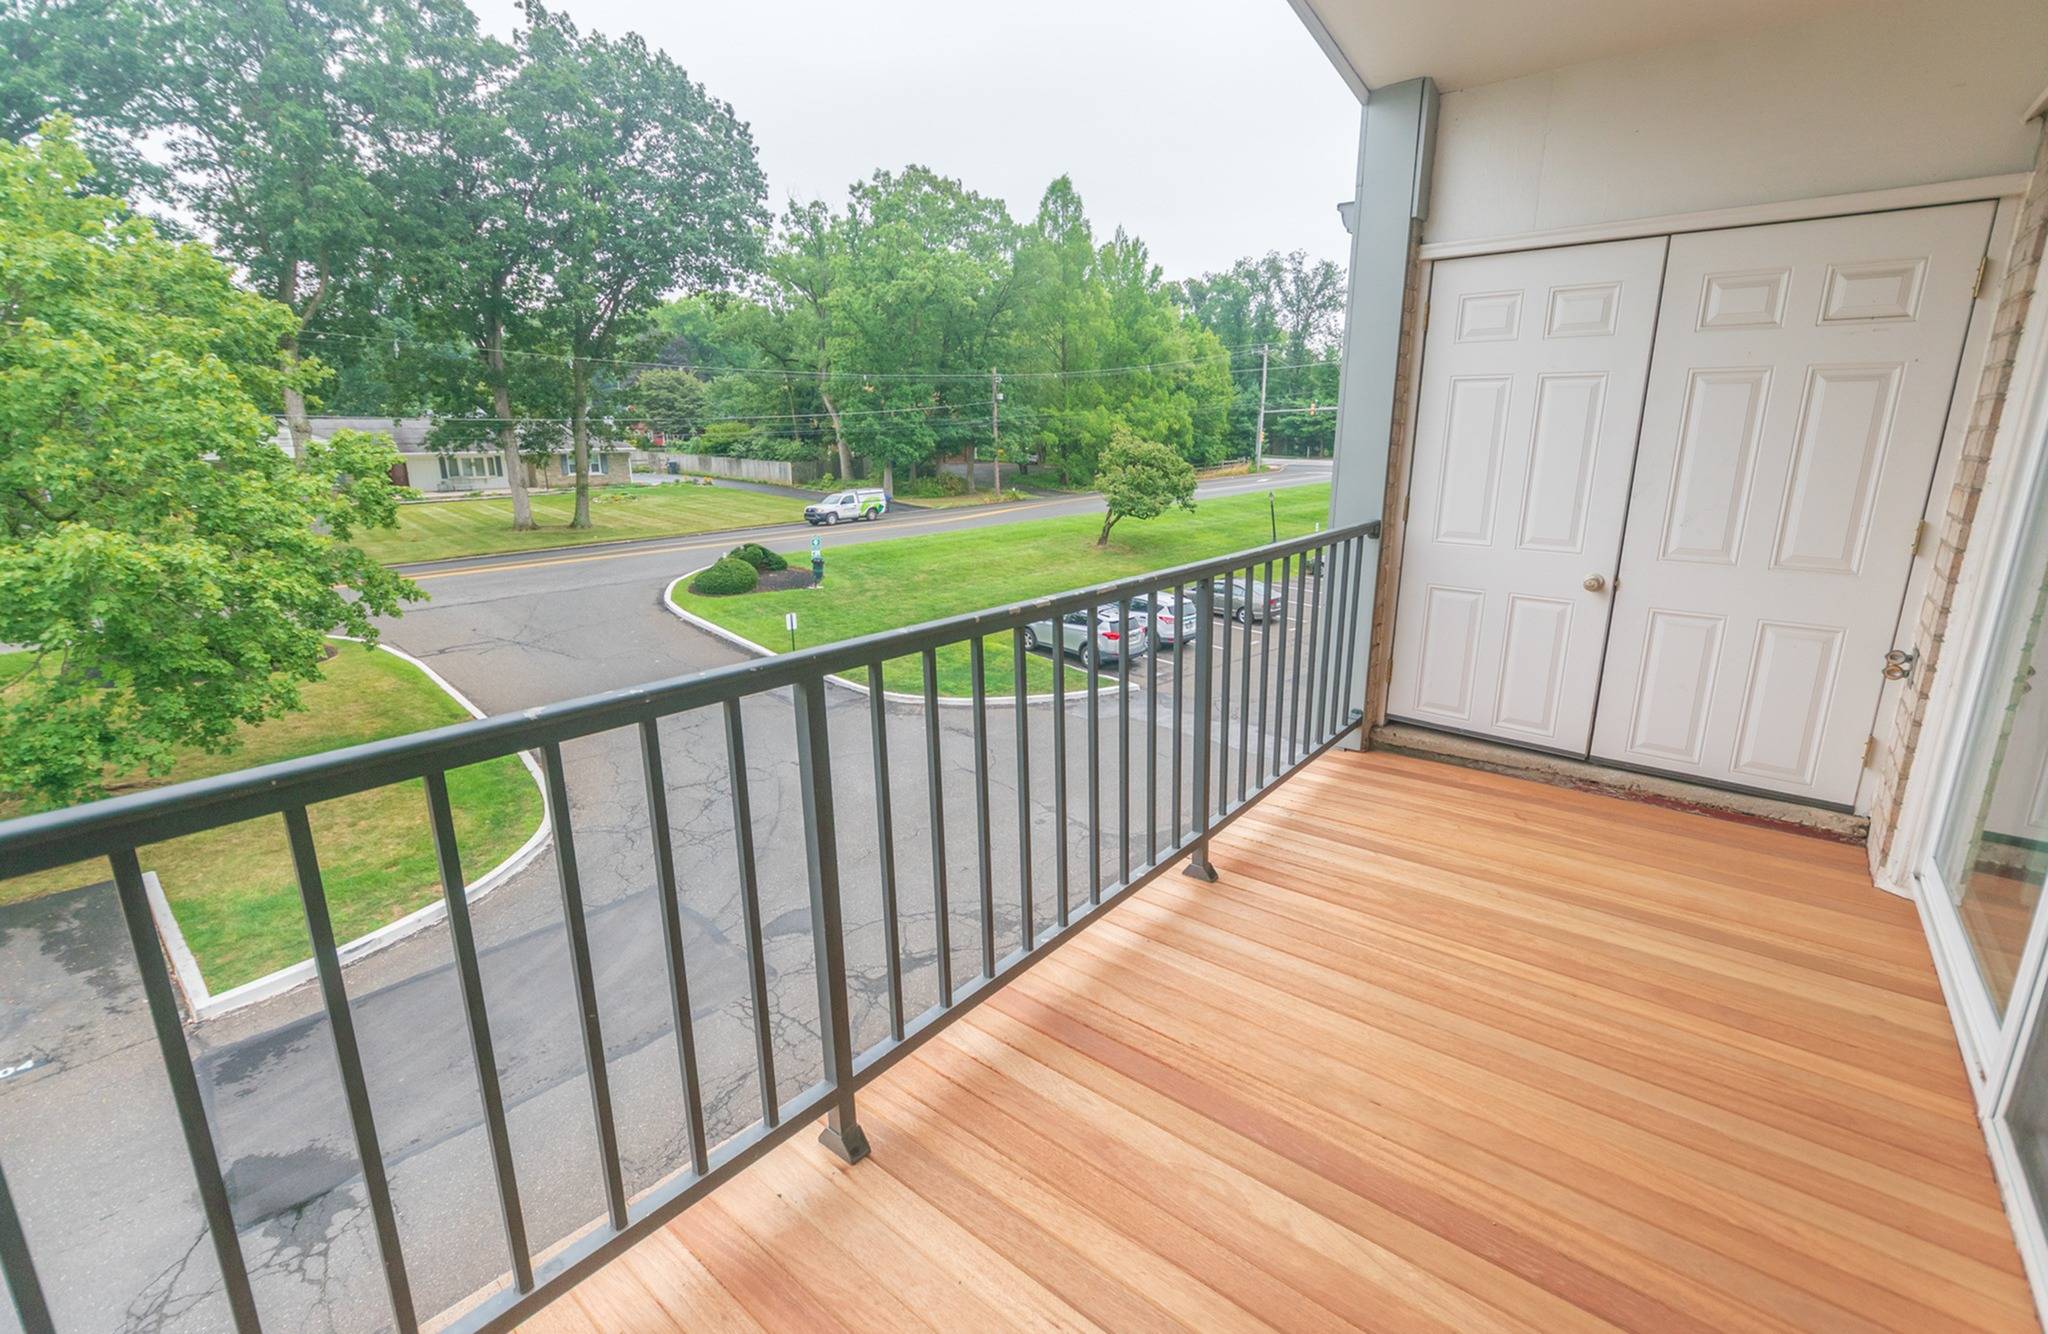 A large balcony overlooking the greenery and parking lot at Valley Stream Apartments